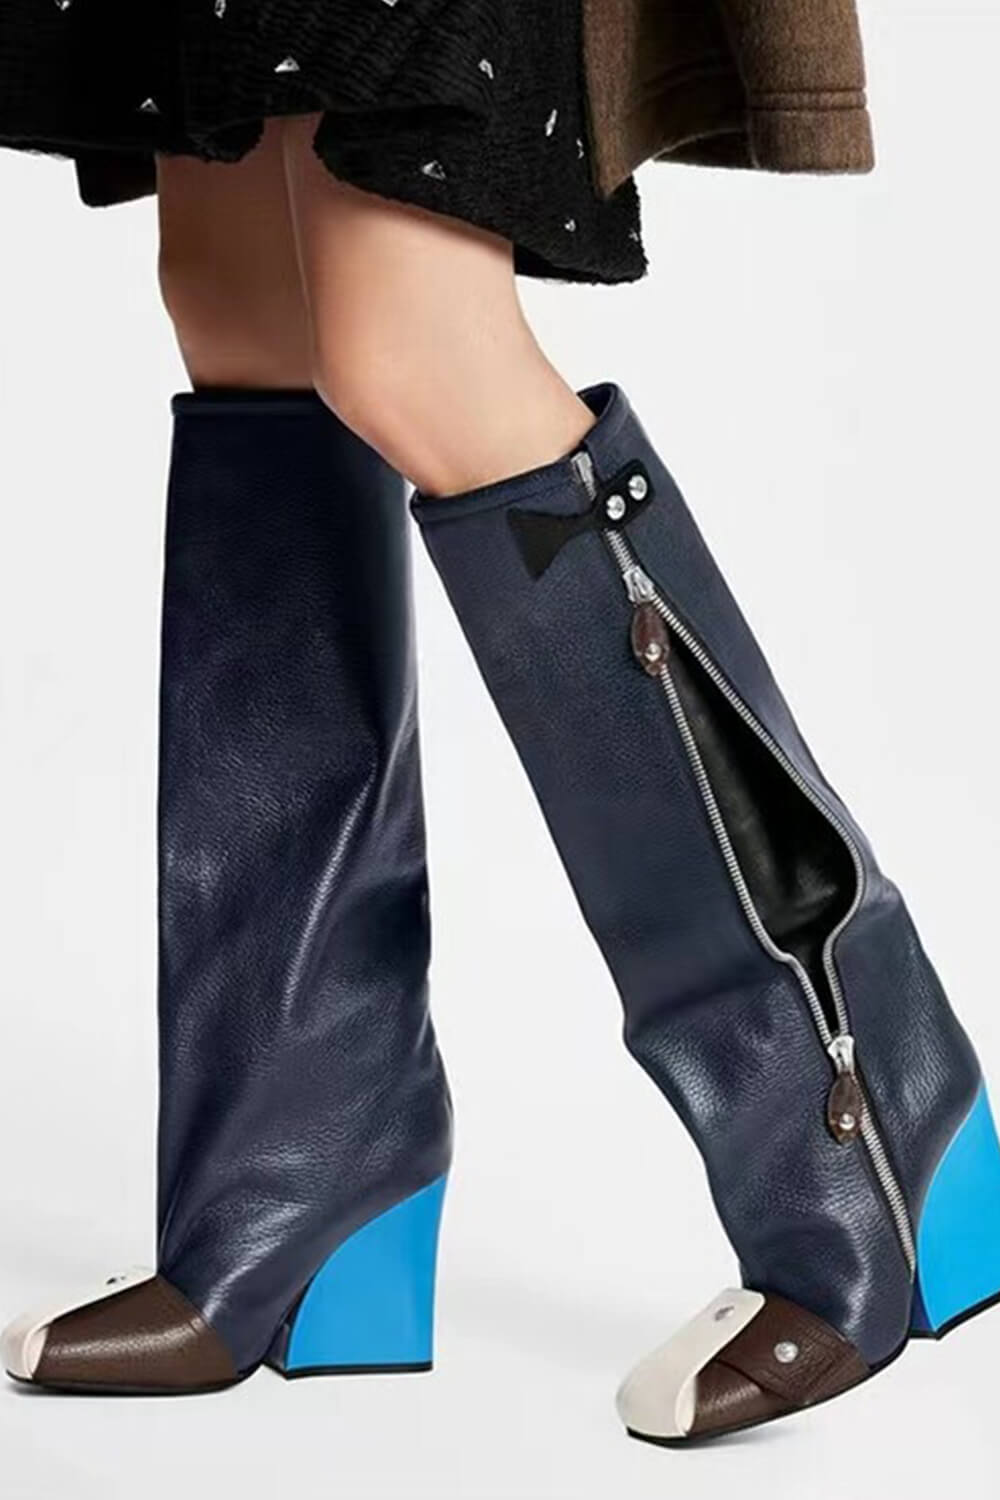 Buckle Detail Square Toe Blue Wedge Heel Knee High Long Boots